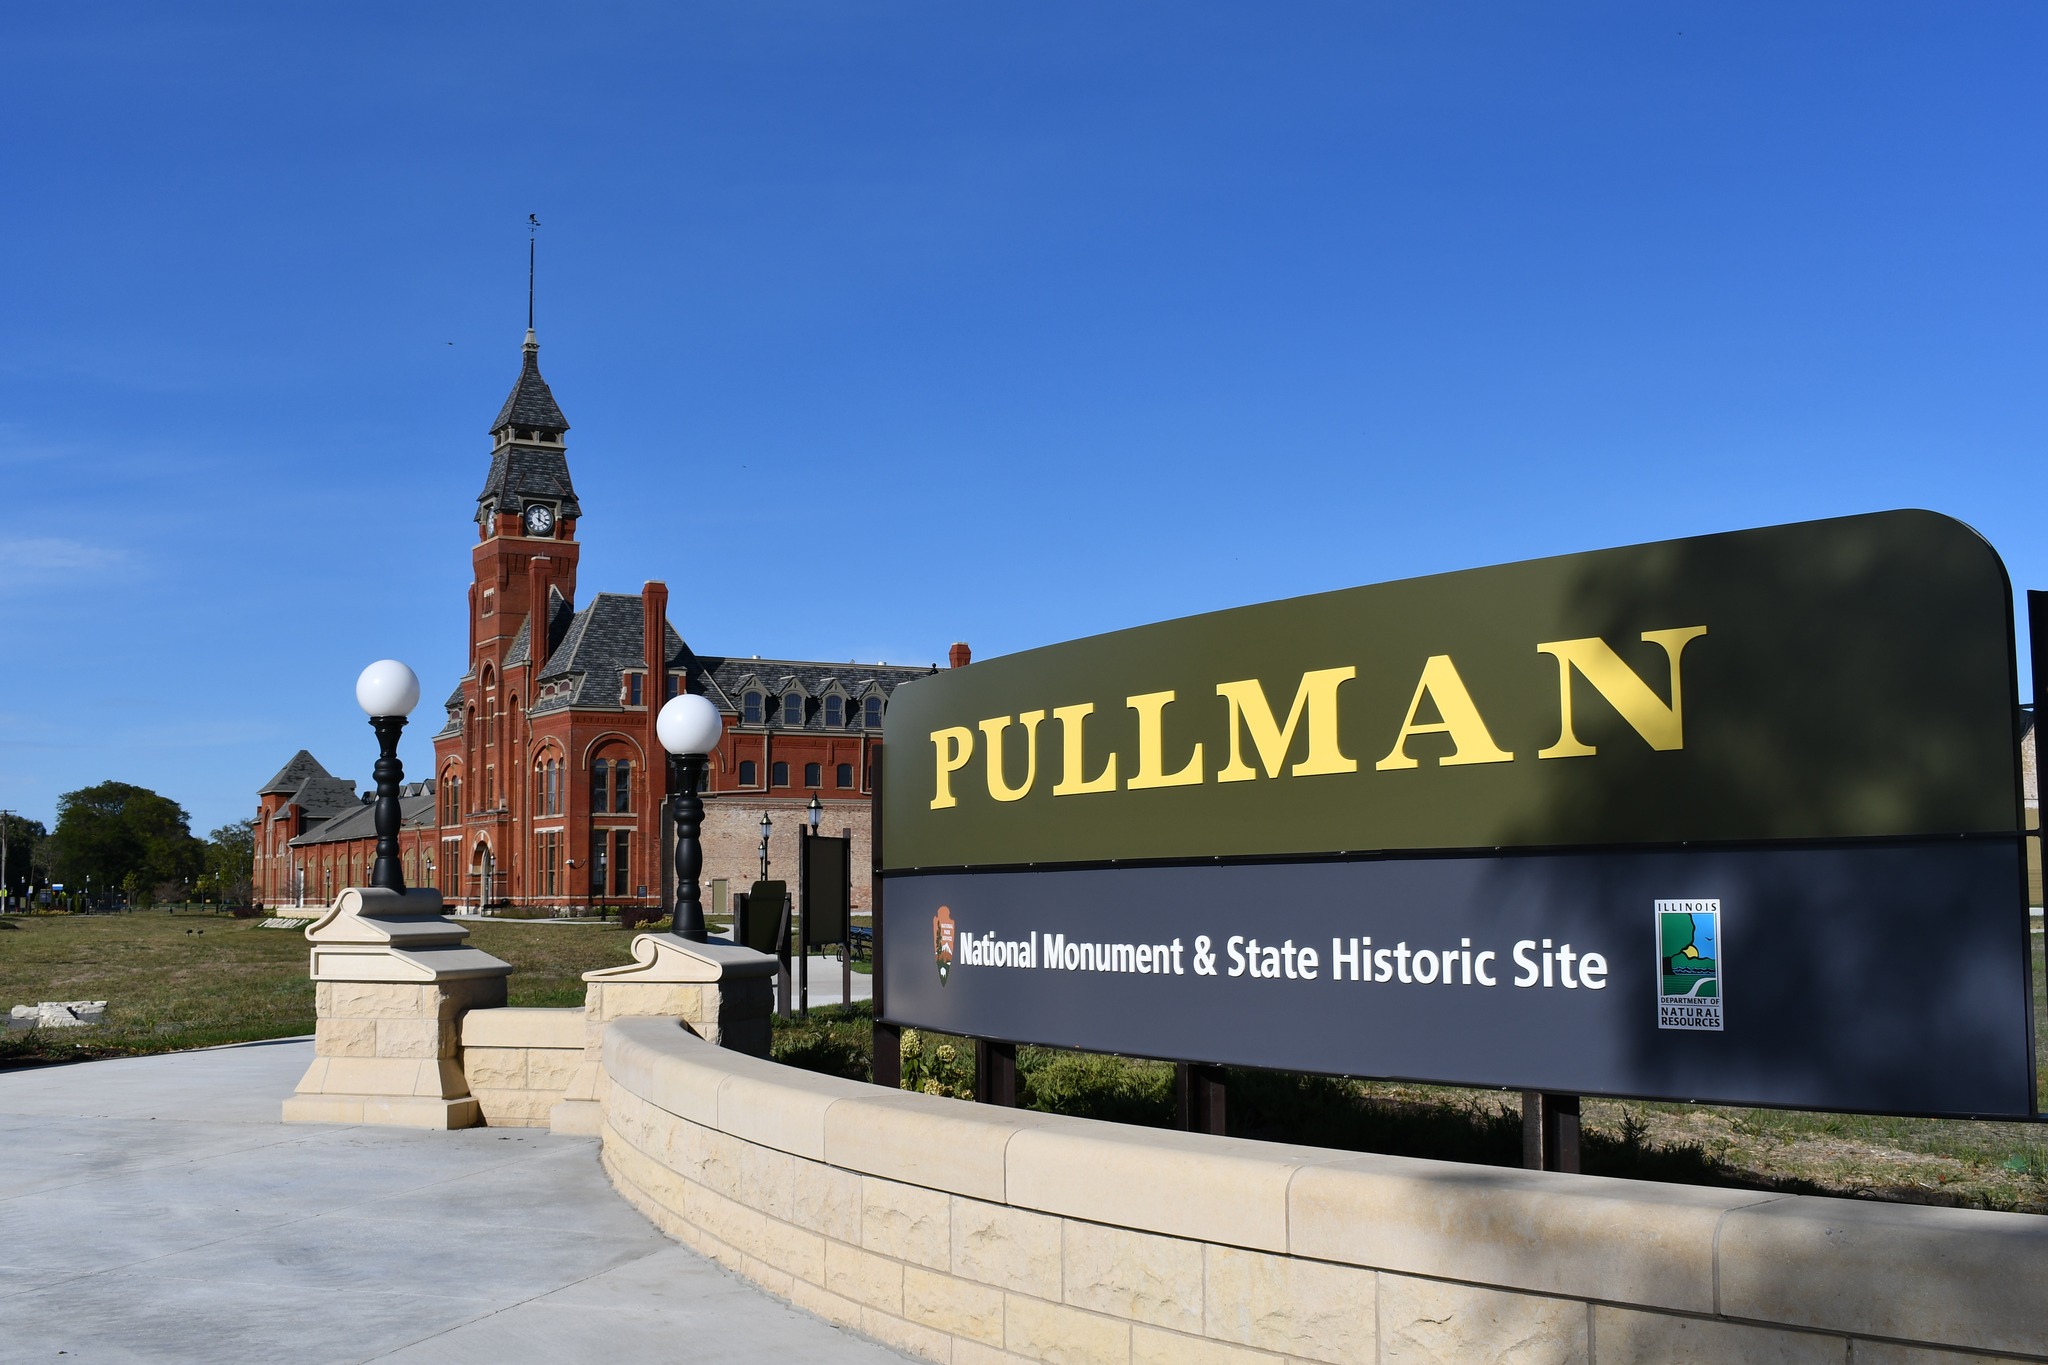 Pullman National Monument and State Historic Site sign in front of the red bricked Administration Clock Tower Building.